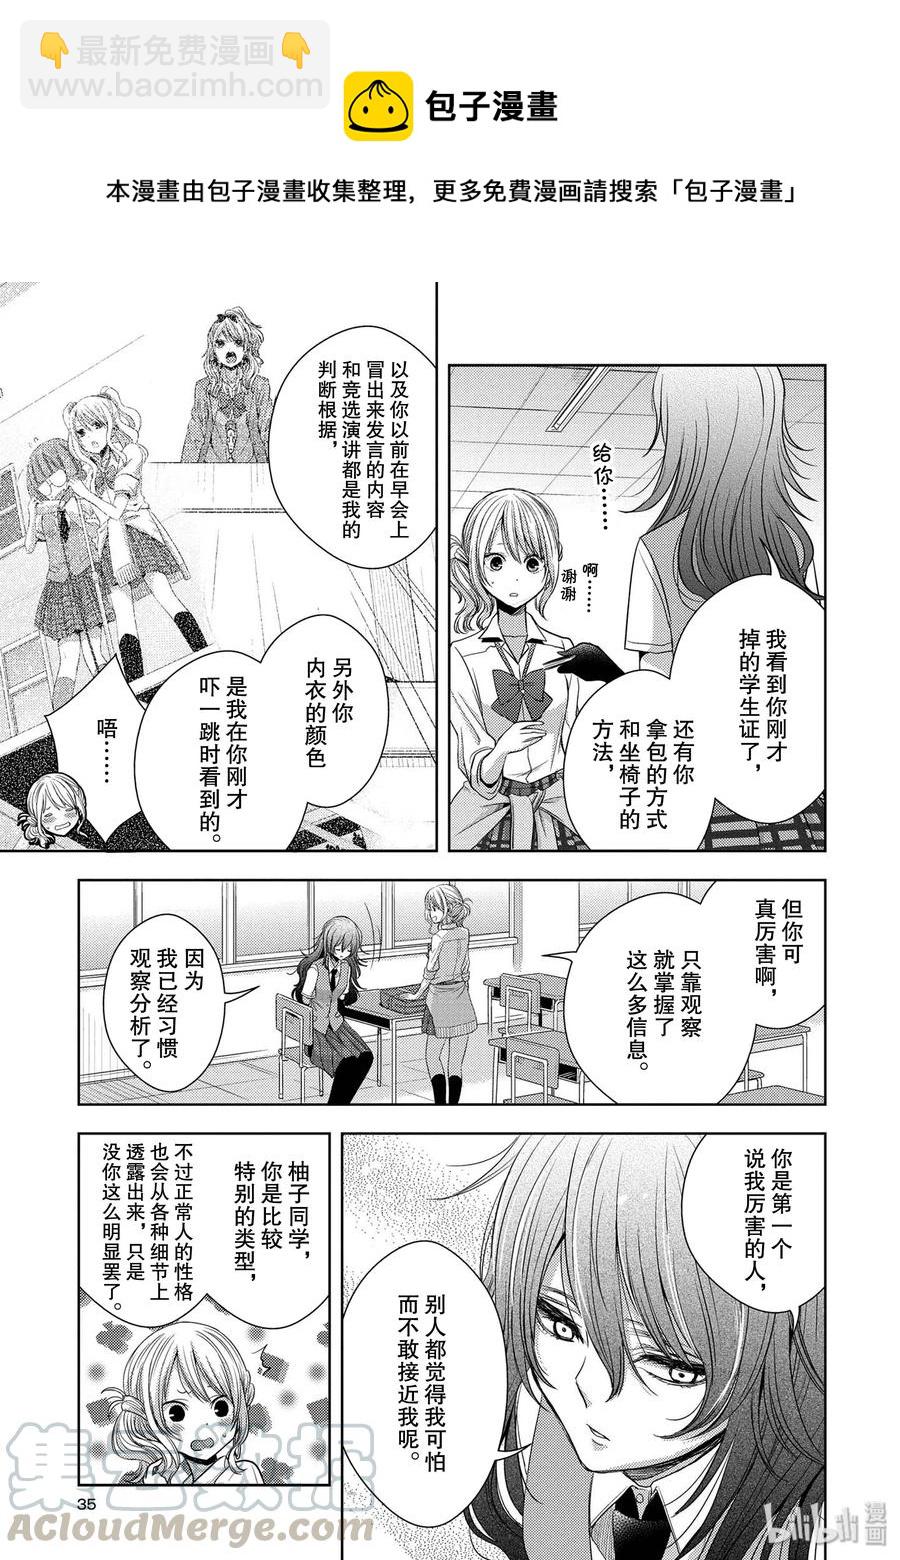 citrus 柑橘味香氣 - 25 Love one another - 4